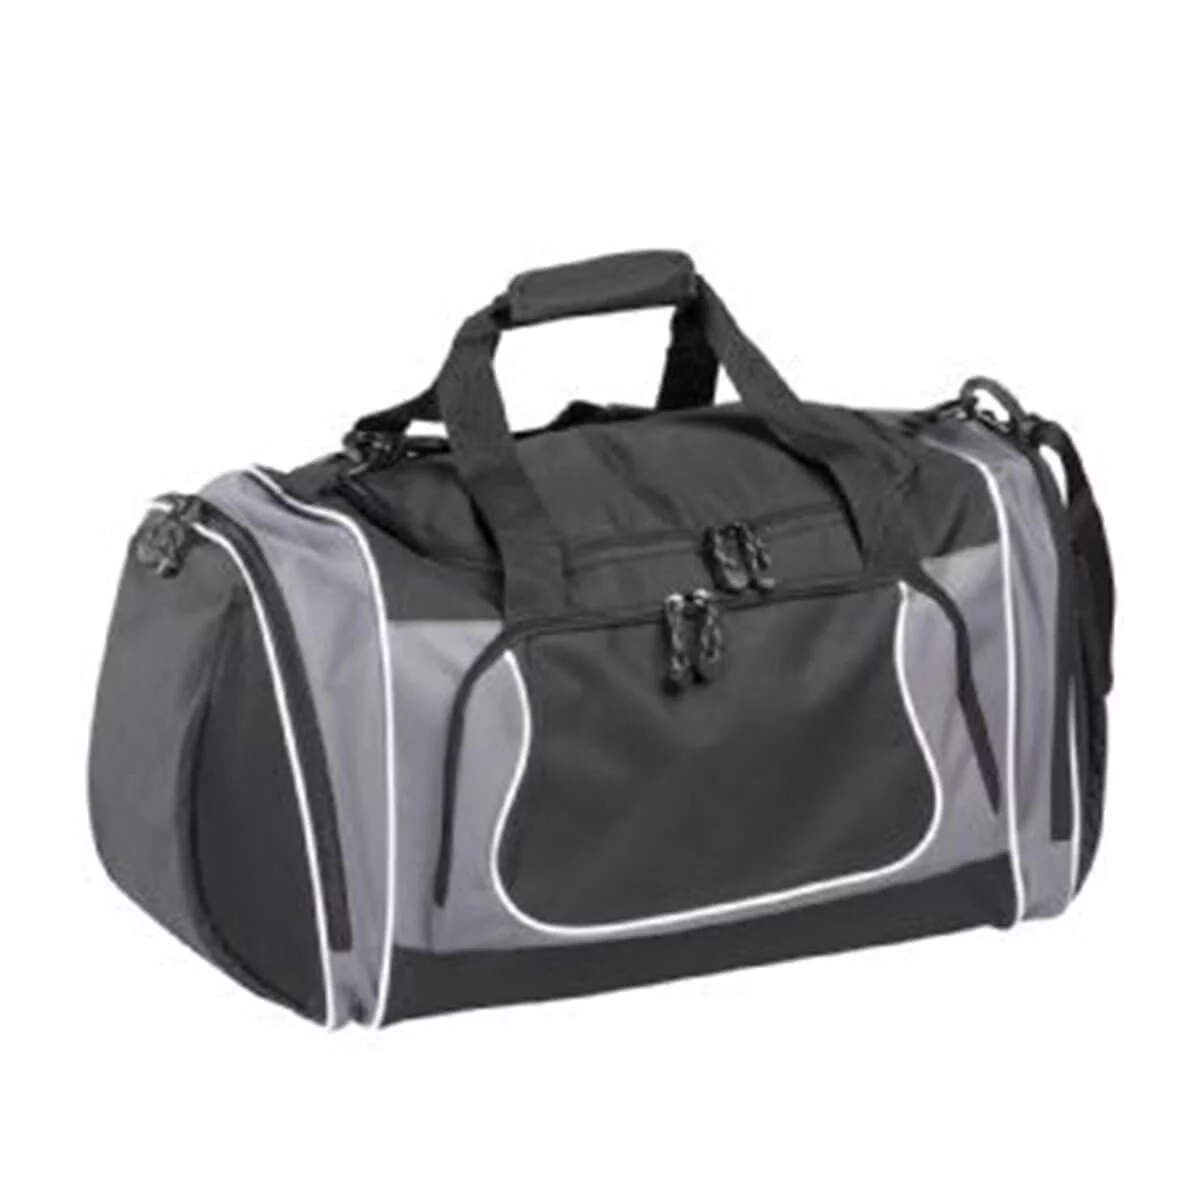 Coil Sports Duffel | Branded Duffel Bags | Black and Grey